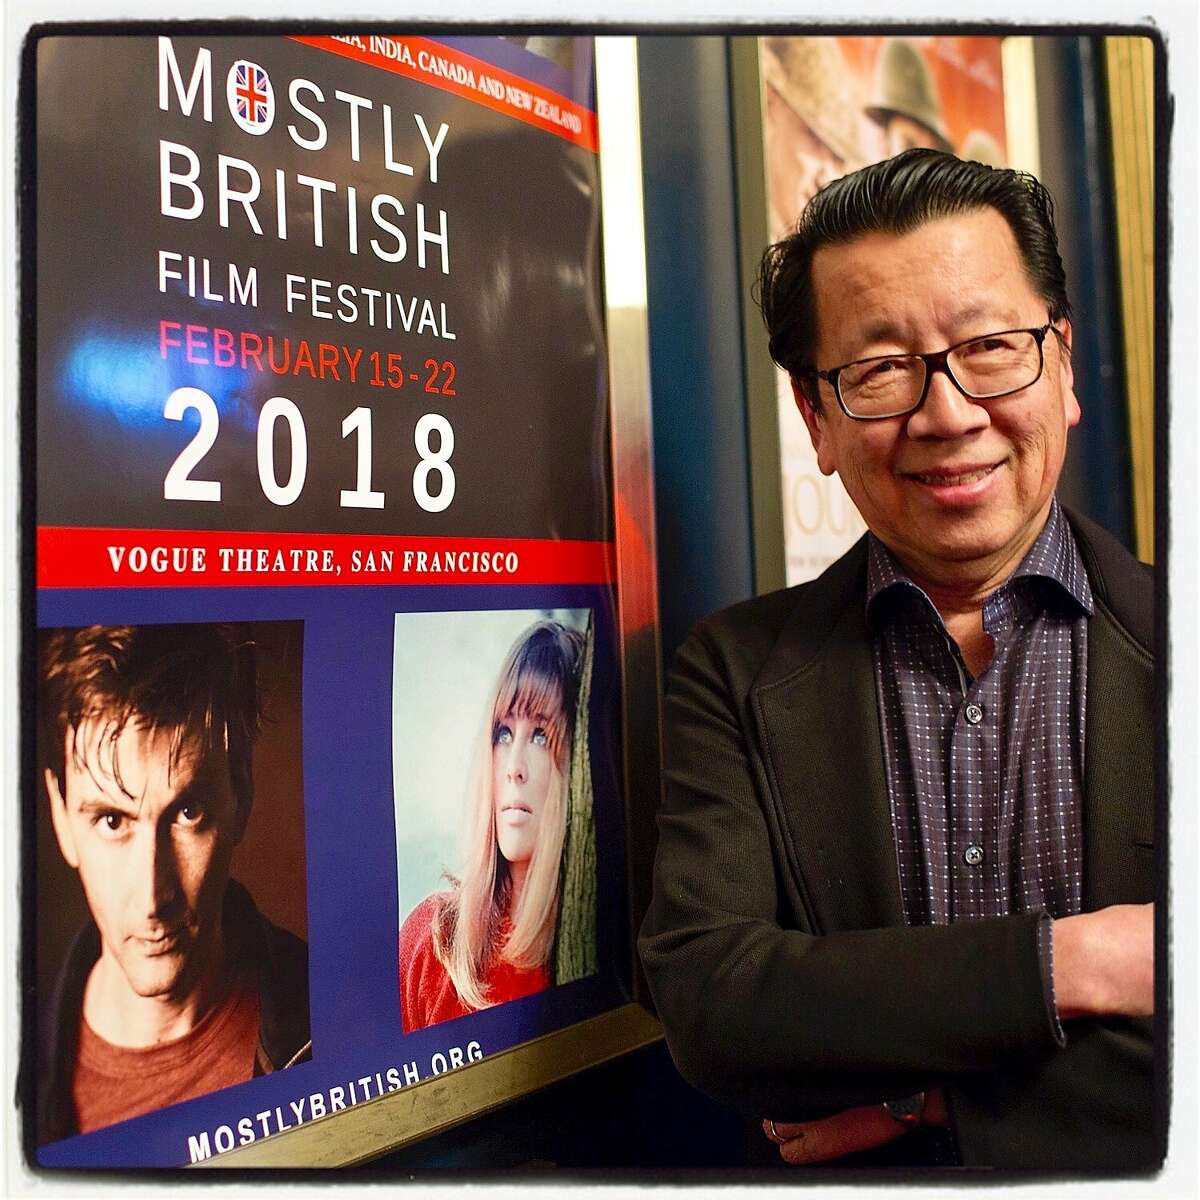 Rock critic-author Ben Fong-Torres at the Vogue Theater. Feb. 18, 2018.